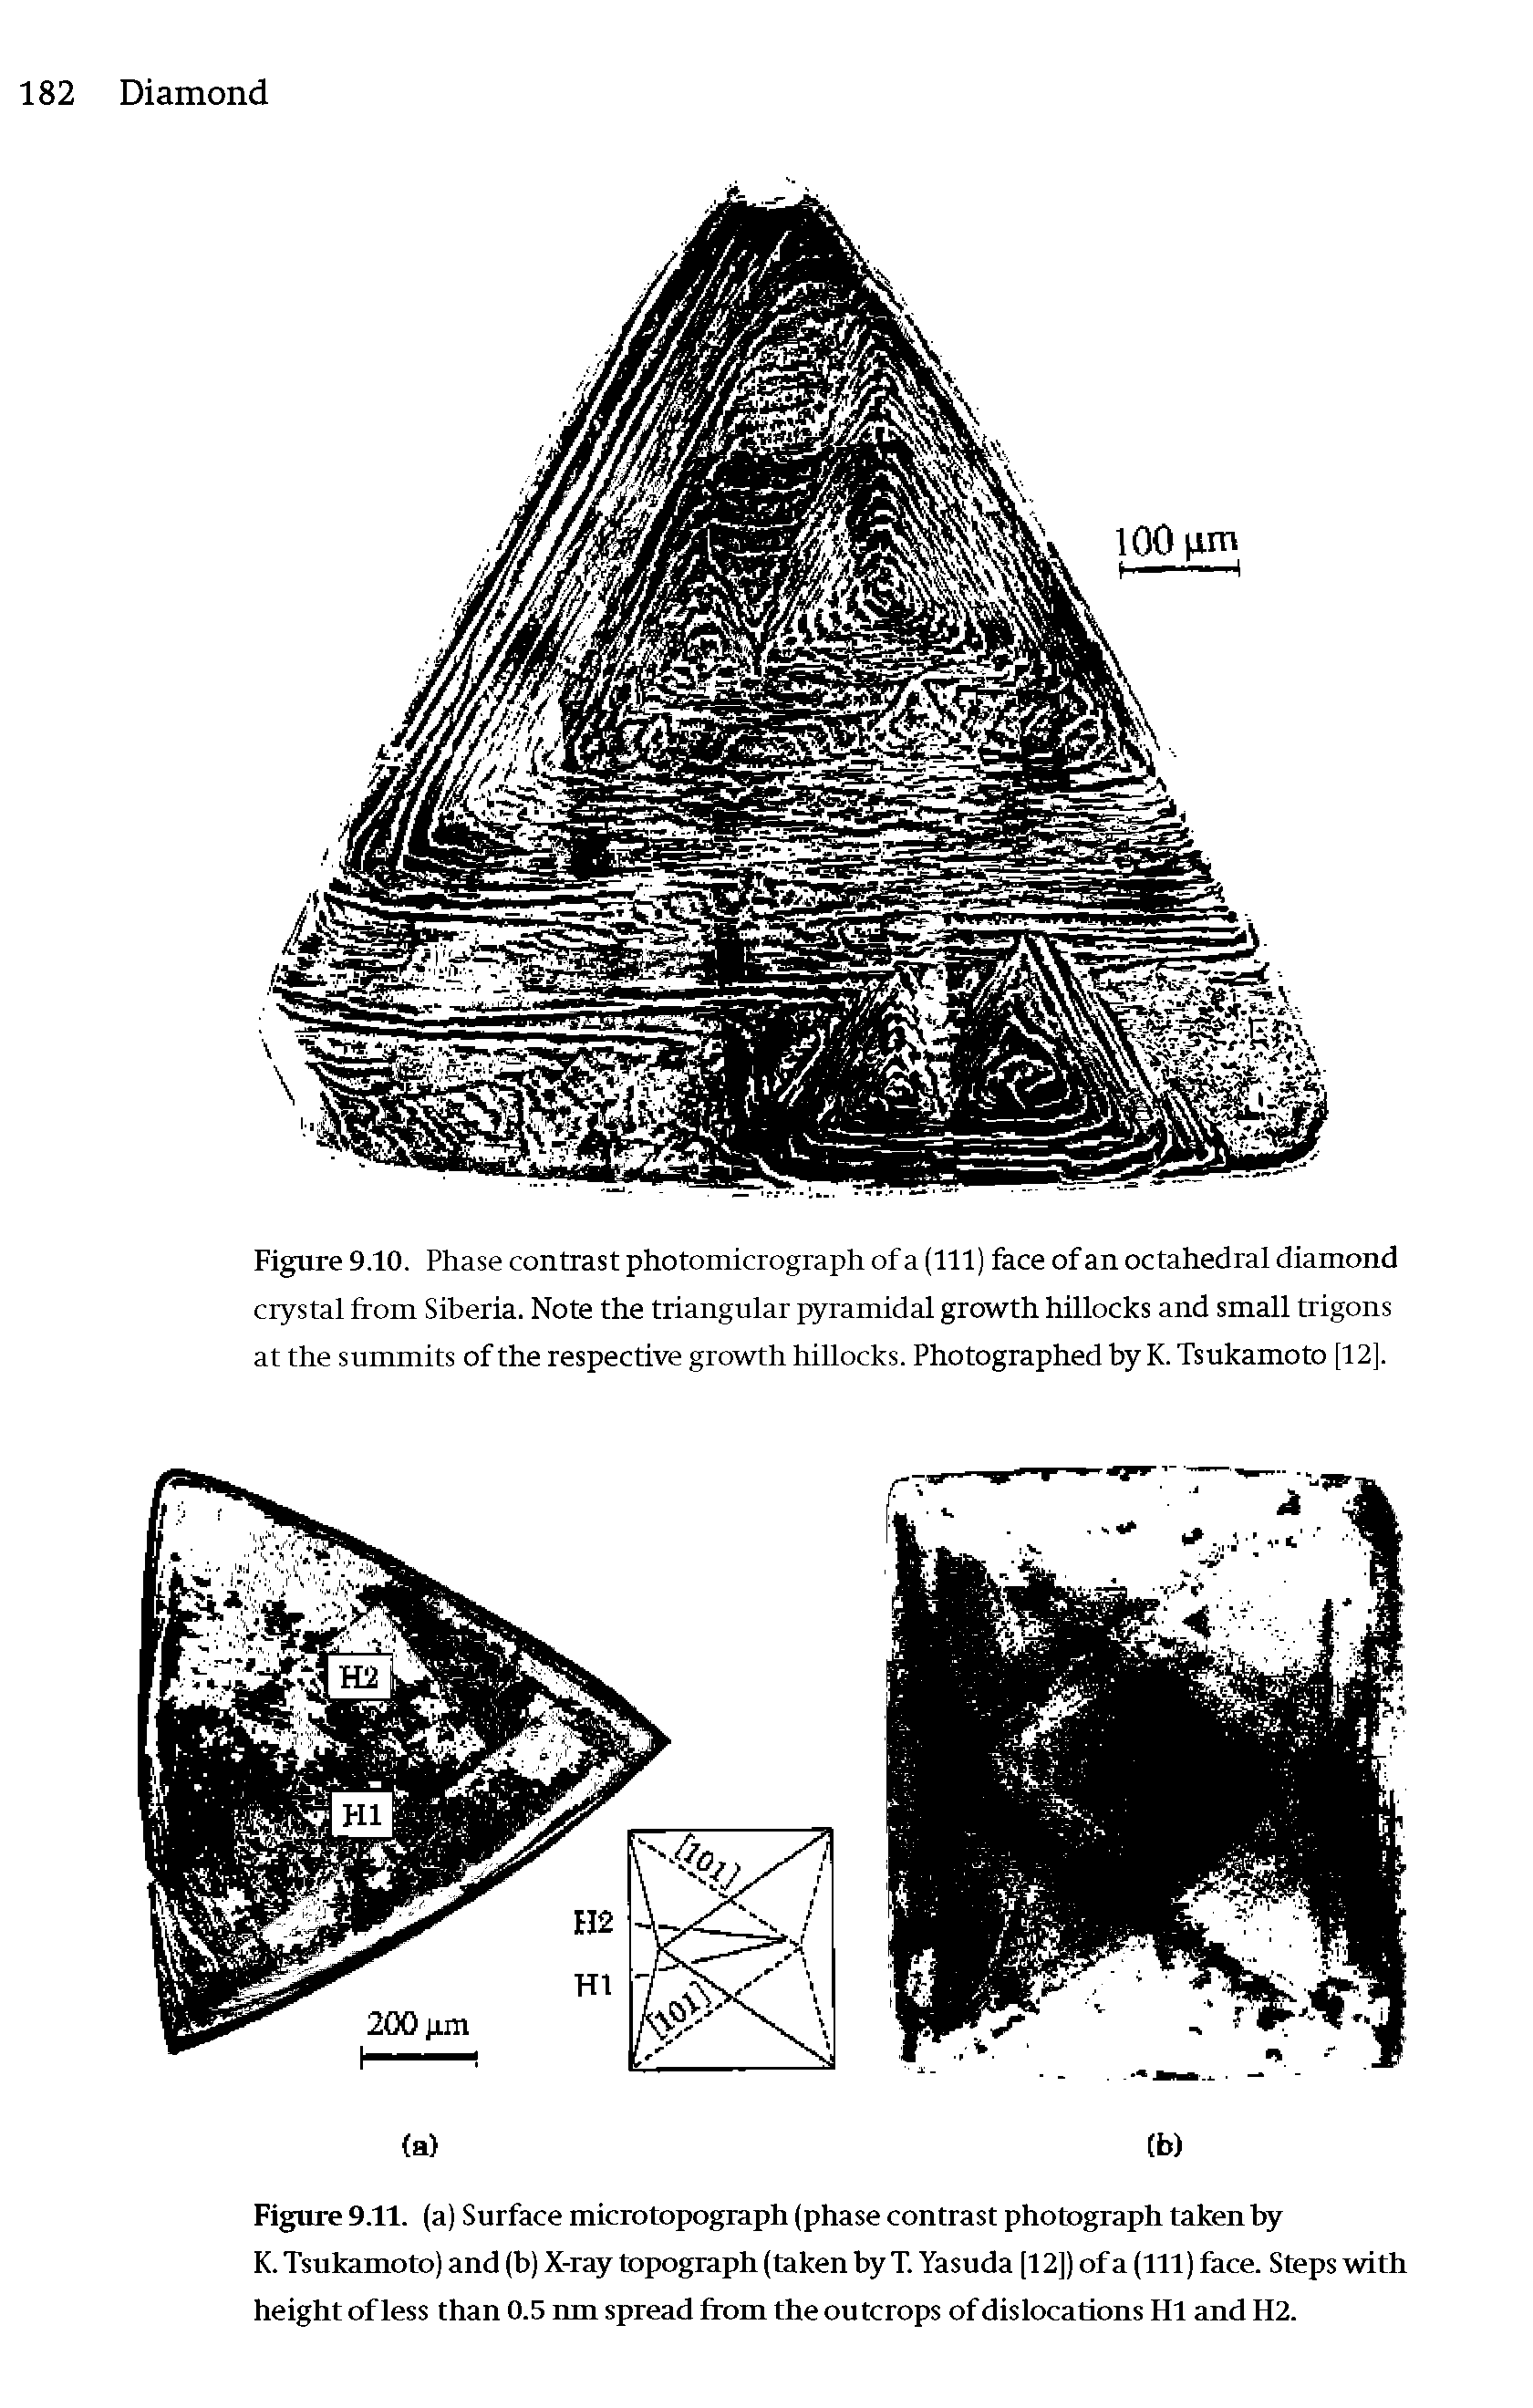 Figure 9.10. Phase contrast photomicrograph of a (111) face ofan octahedral diamond crystal from Siberia. Note the triangular pyramidal growth hillocks and small trigons at the summits of the respective growth hillocks. Photographed by K. Tsukamoto [12].